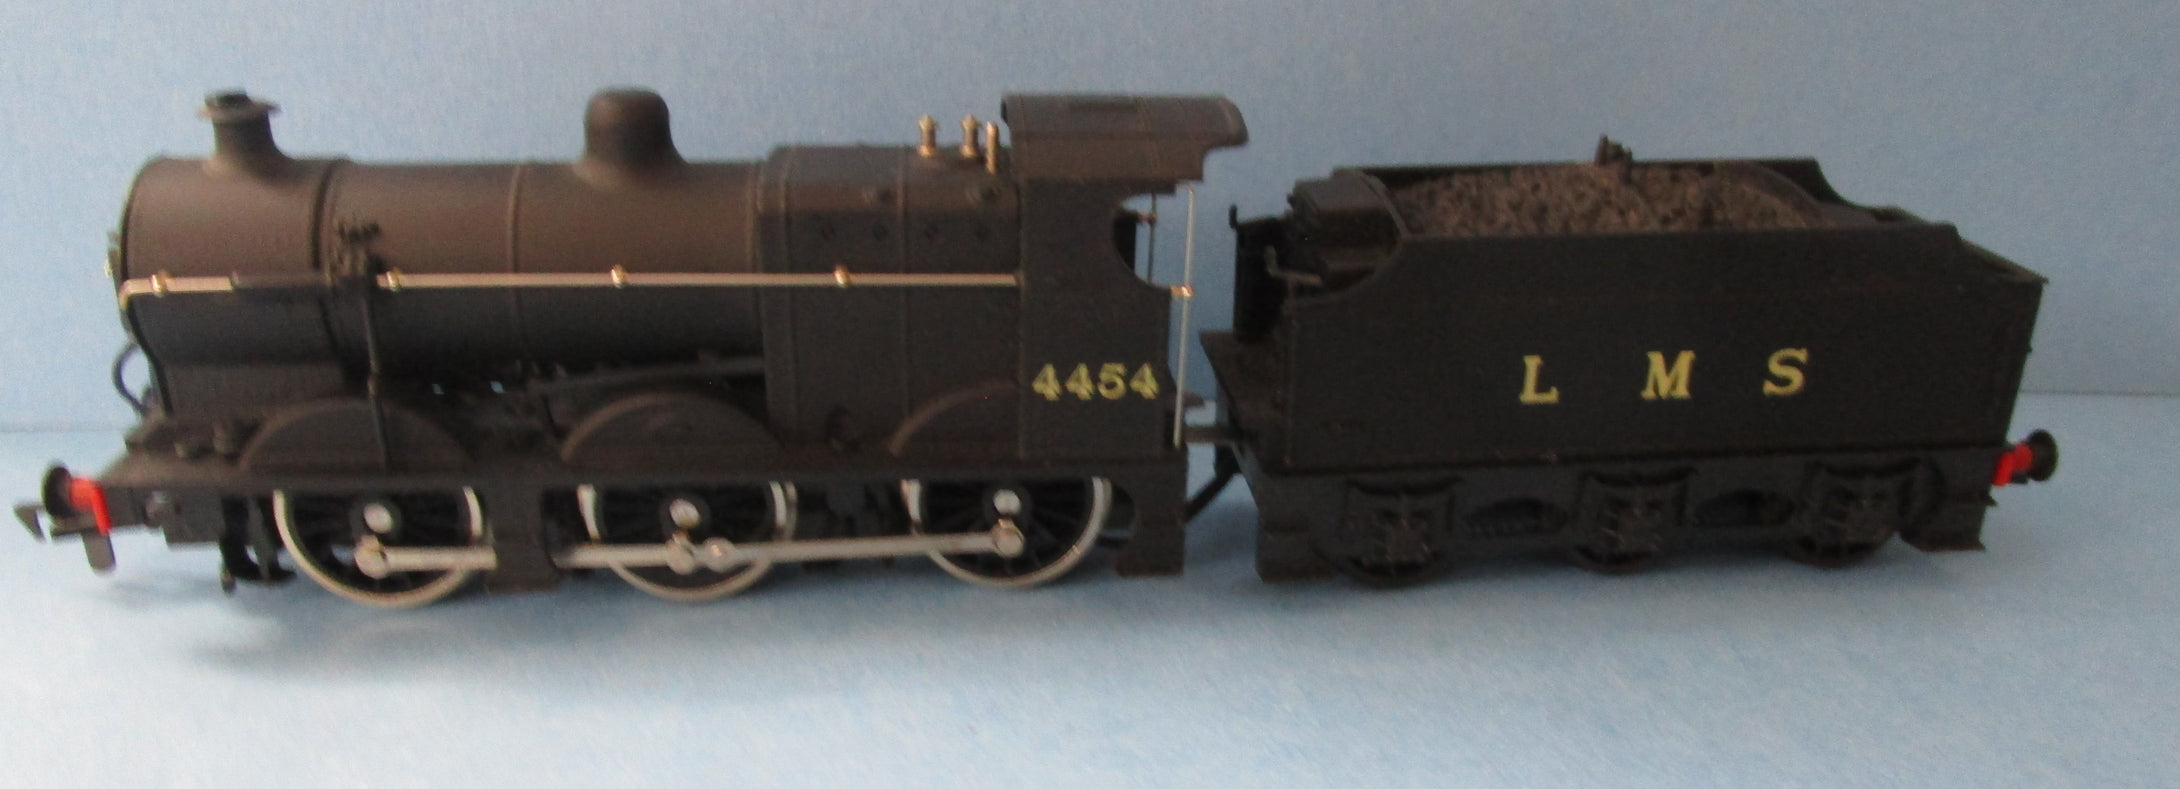 54122-6 AIRFIX (GMR) Class 4F Fowler 0-6-0 4454 in LMS Unlined Black - UNBOXED